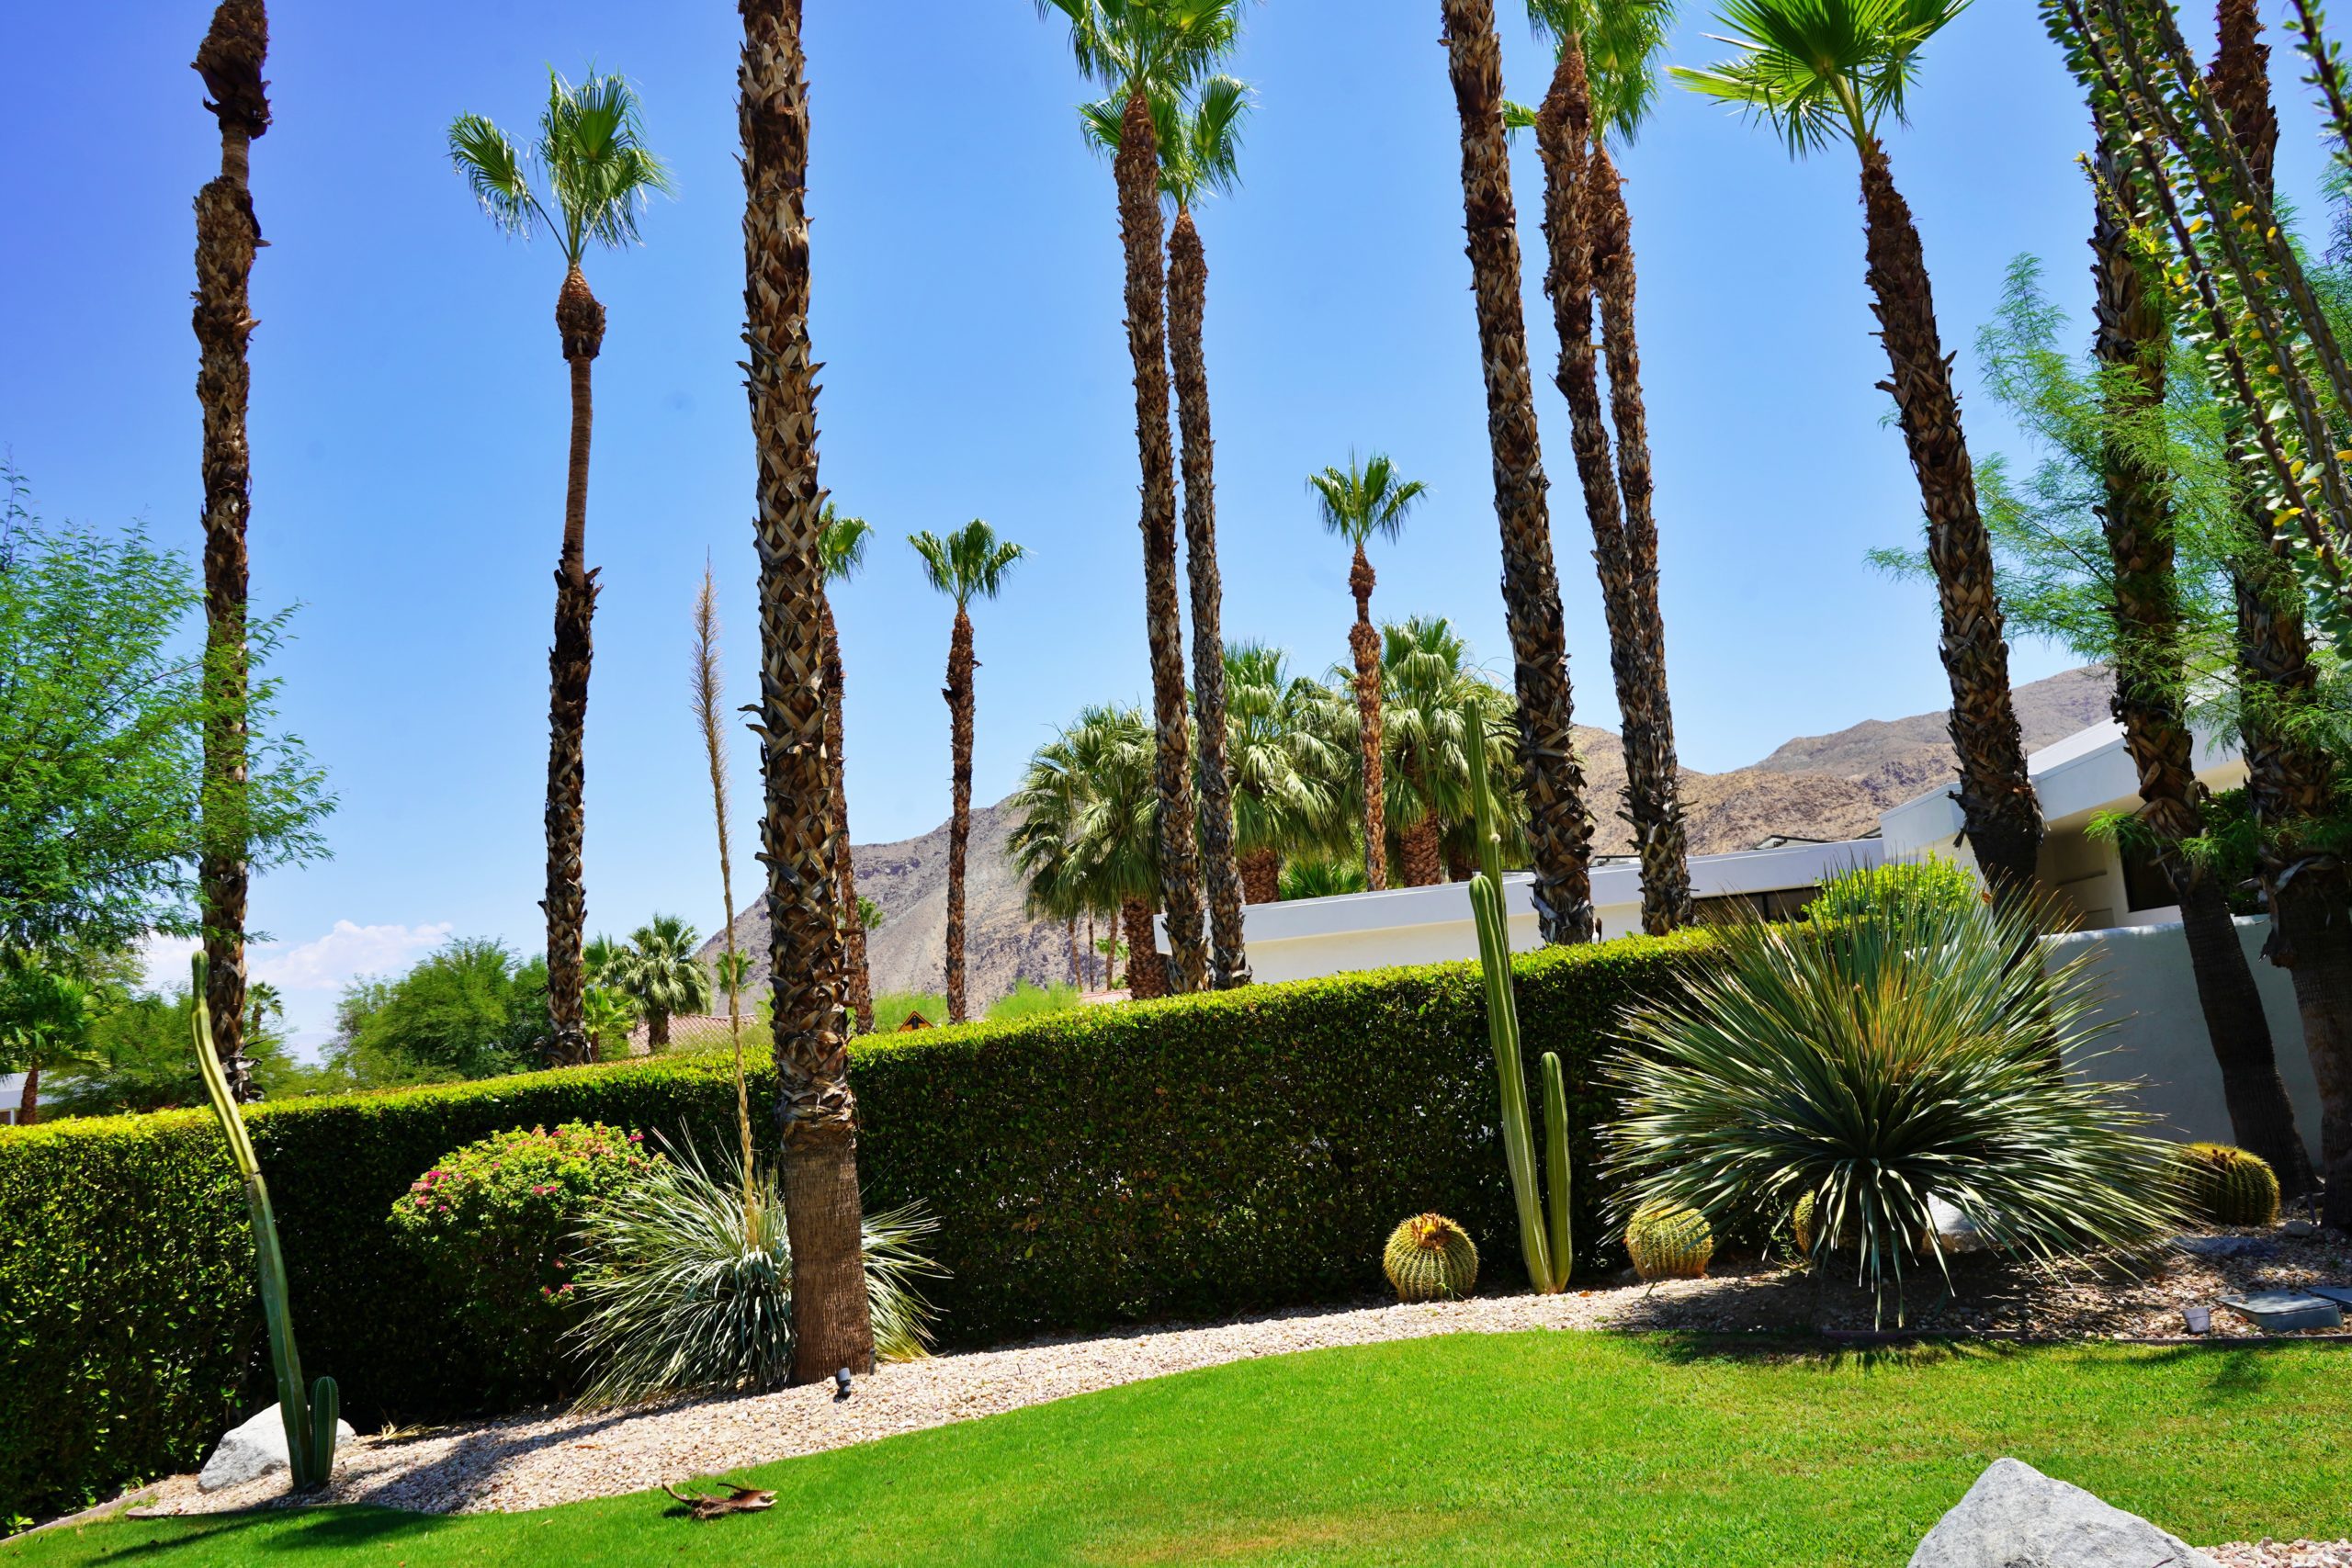 Palm Springs Travel Makeup and Skincare